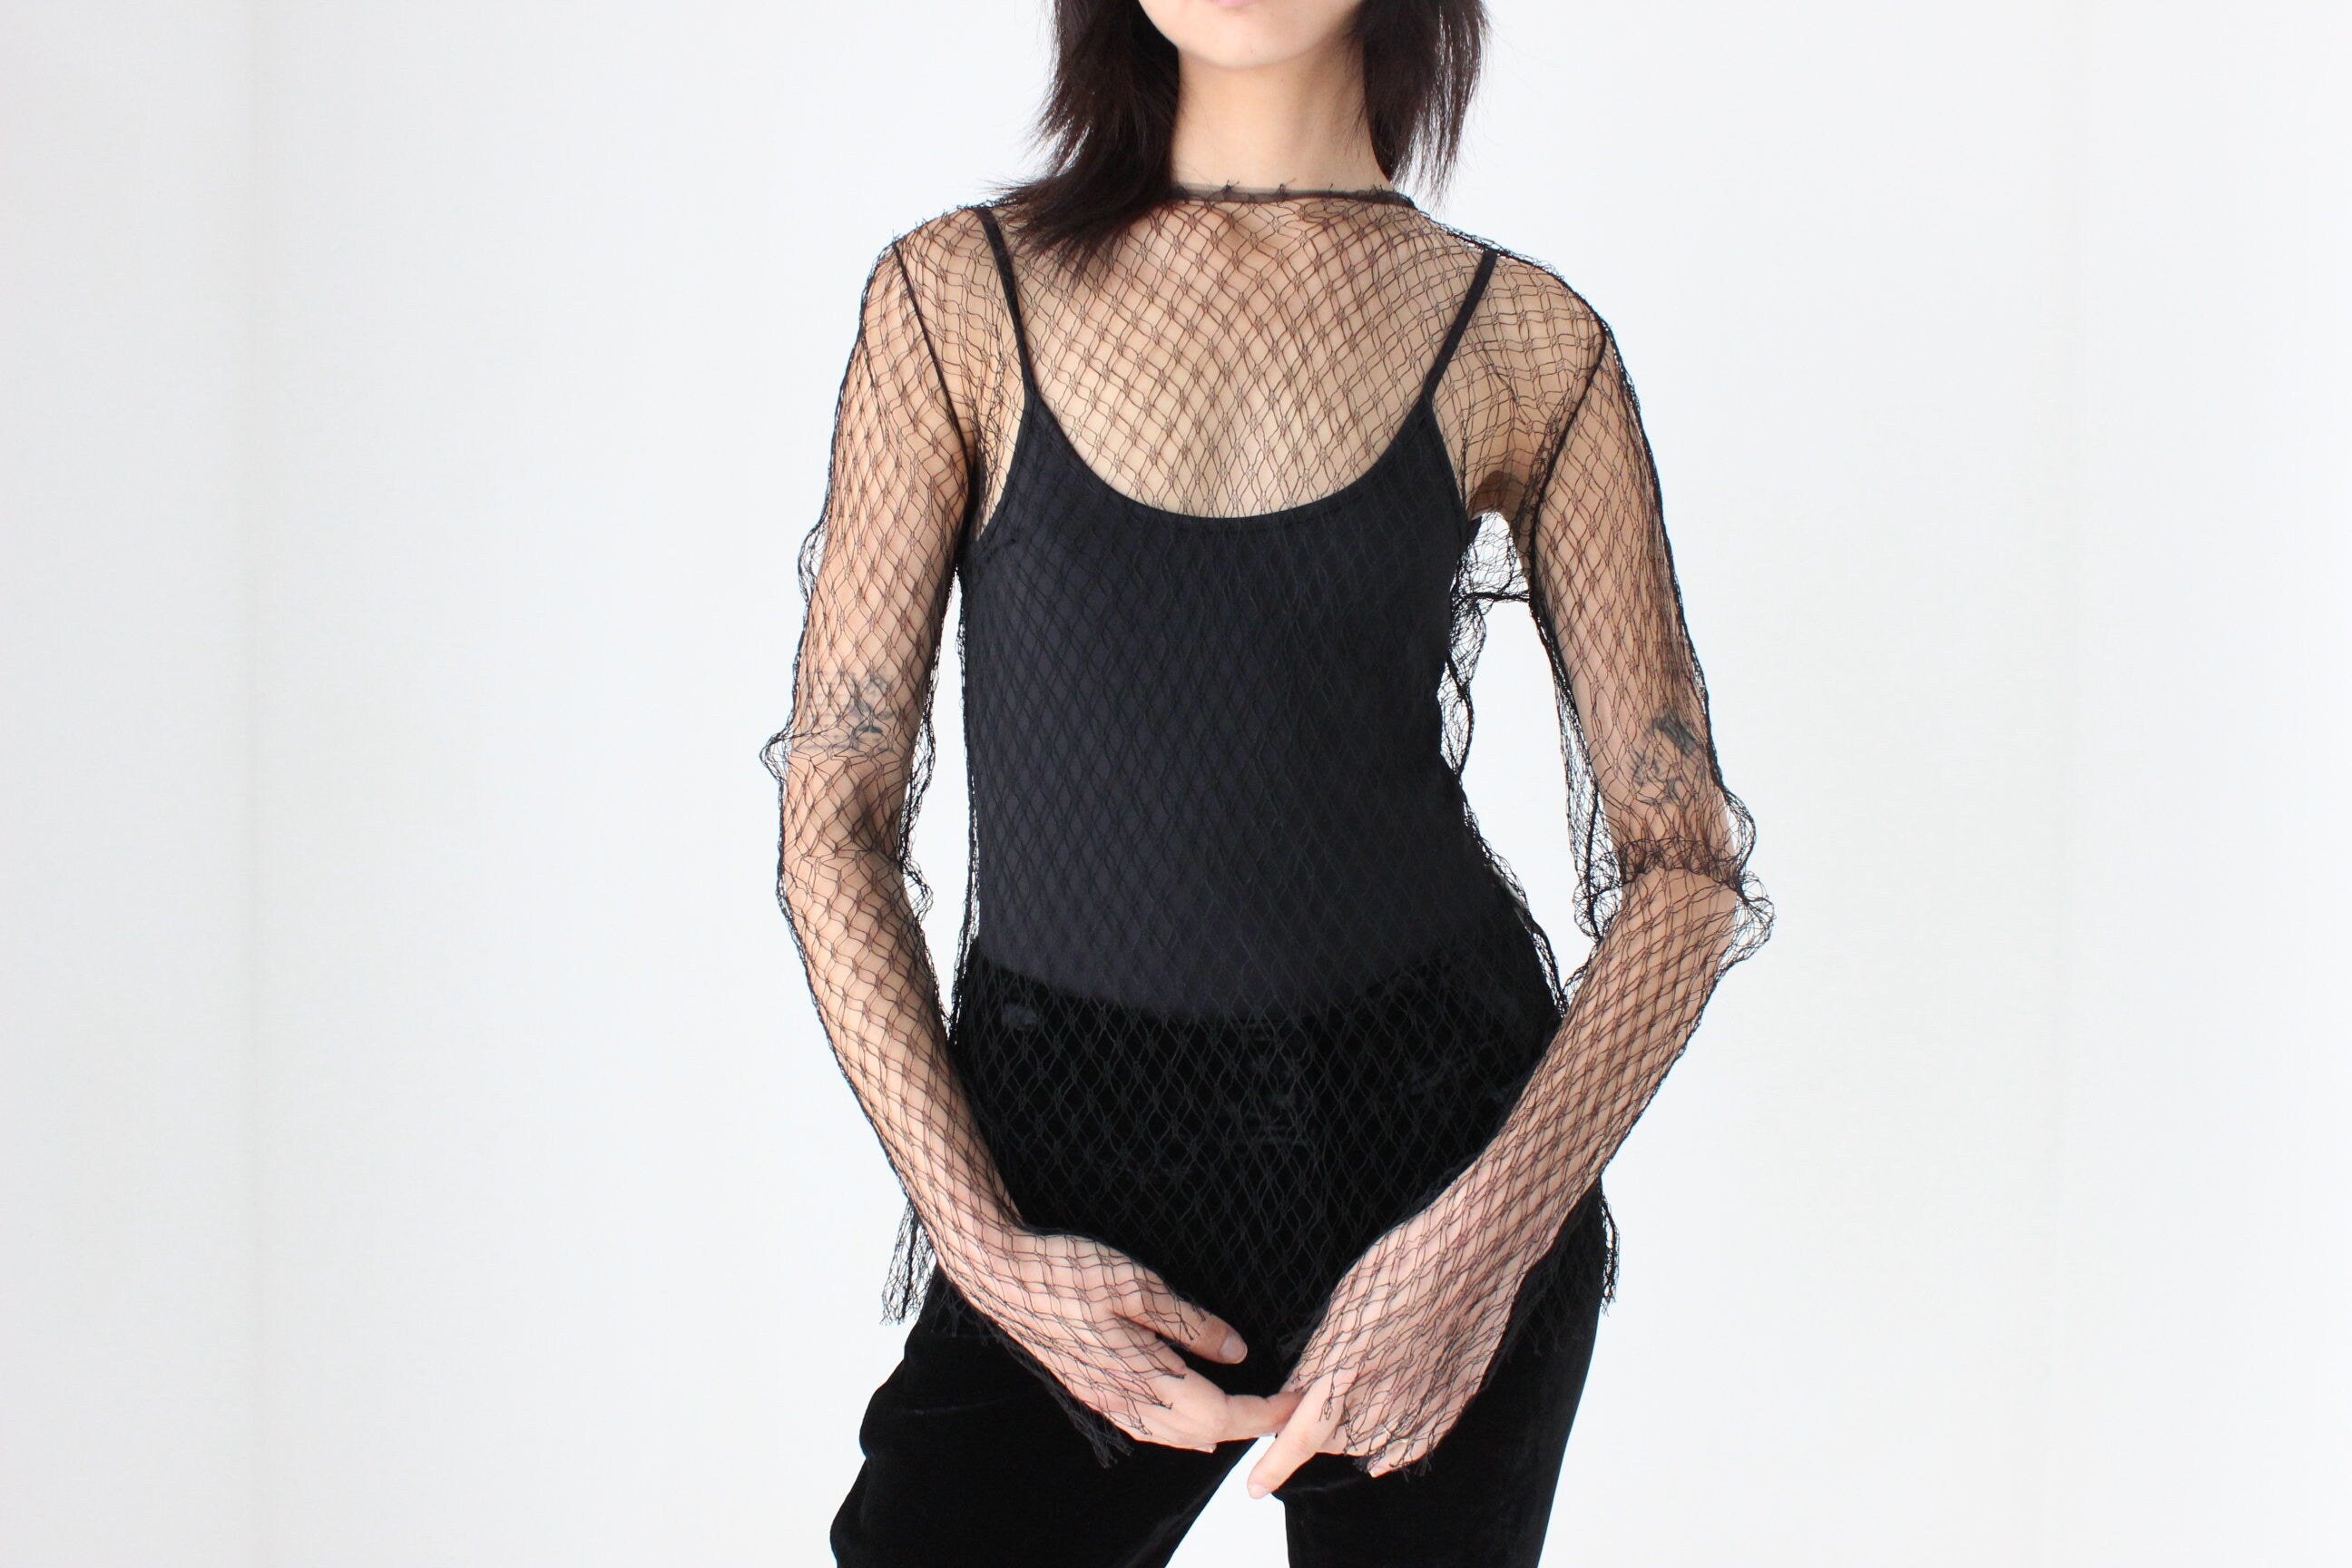 90s DOLCE & GABBANA Highly Collectible Sheer Fishnet Top